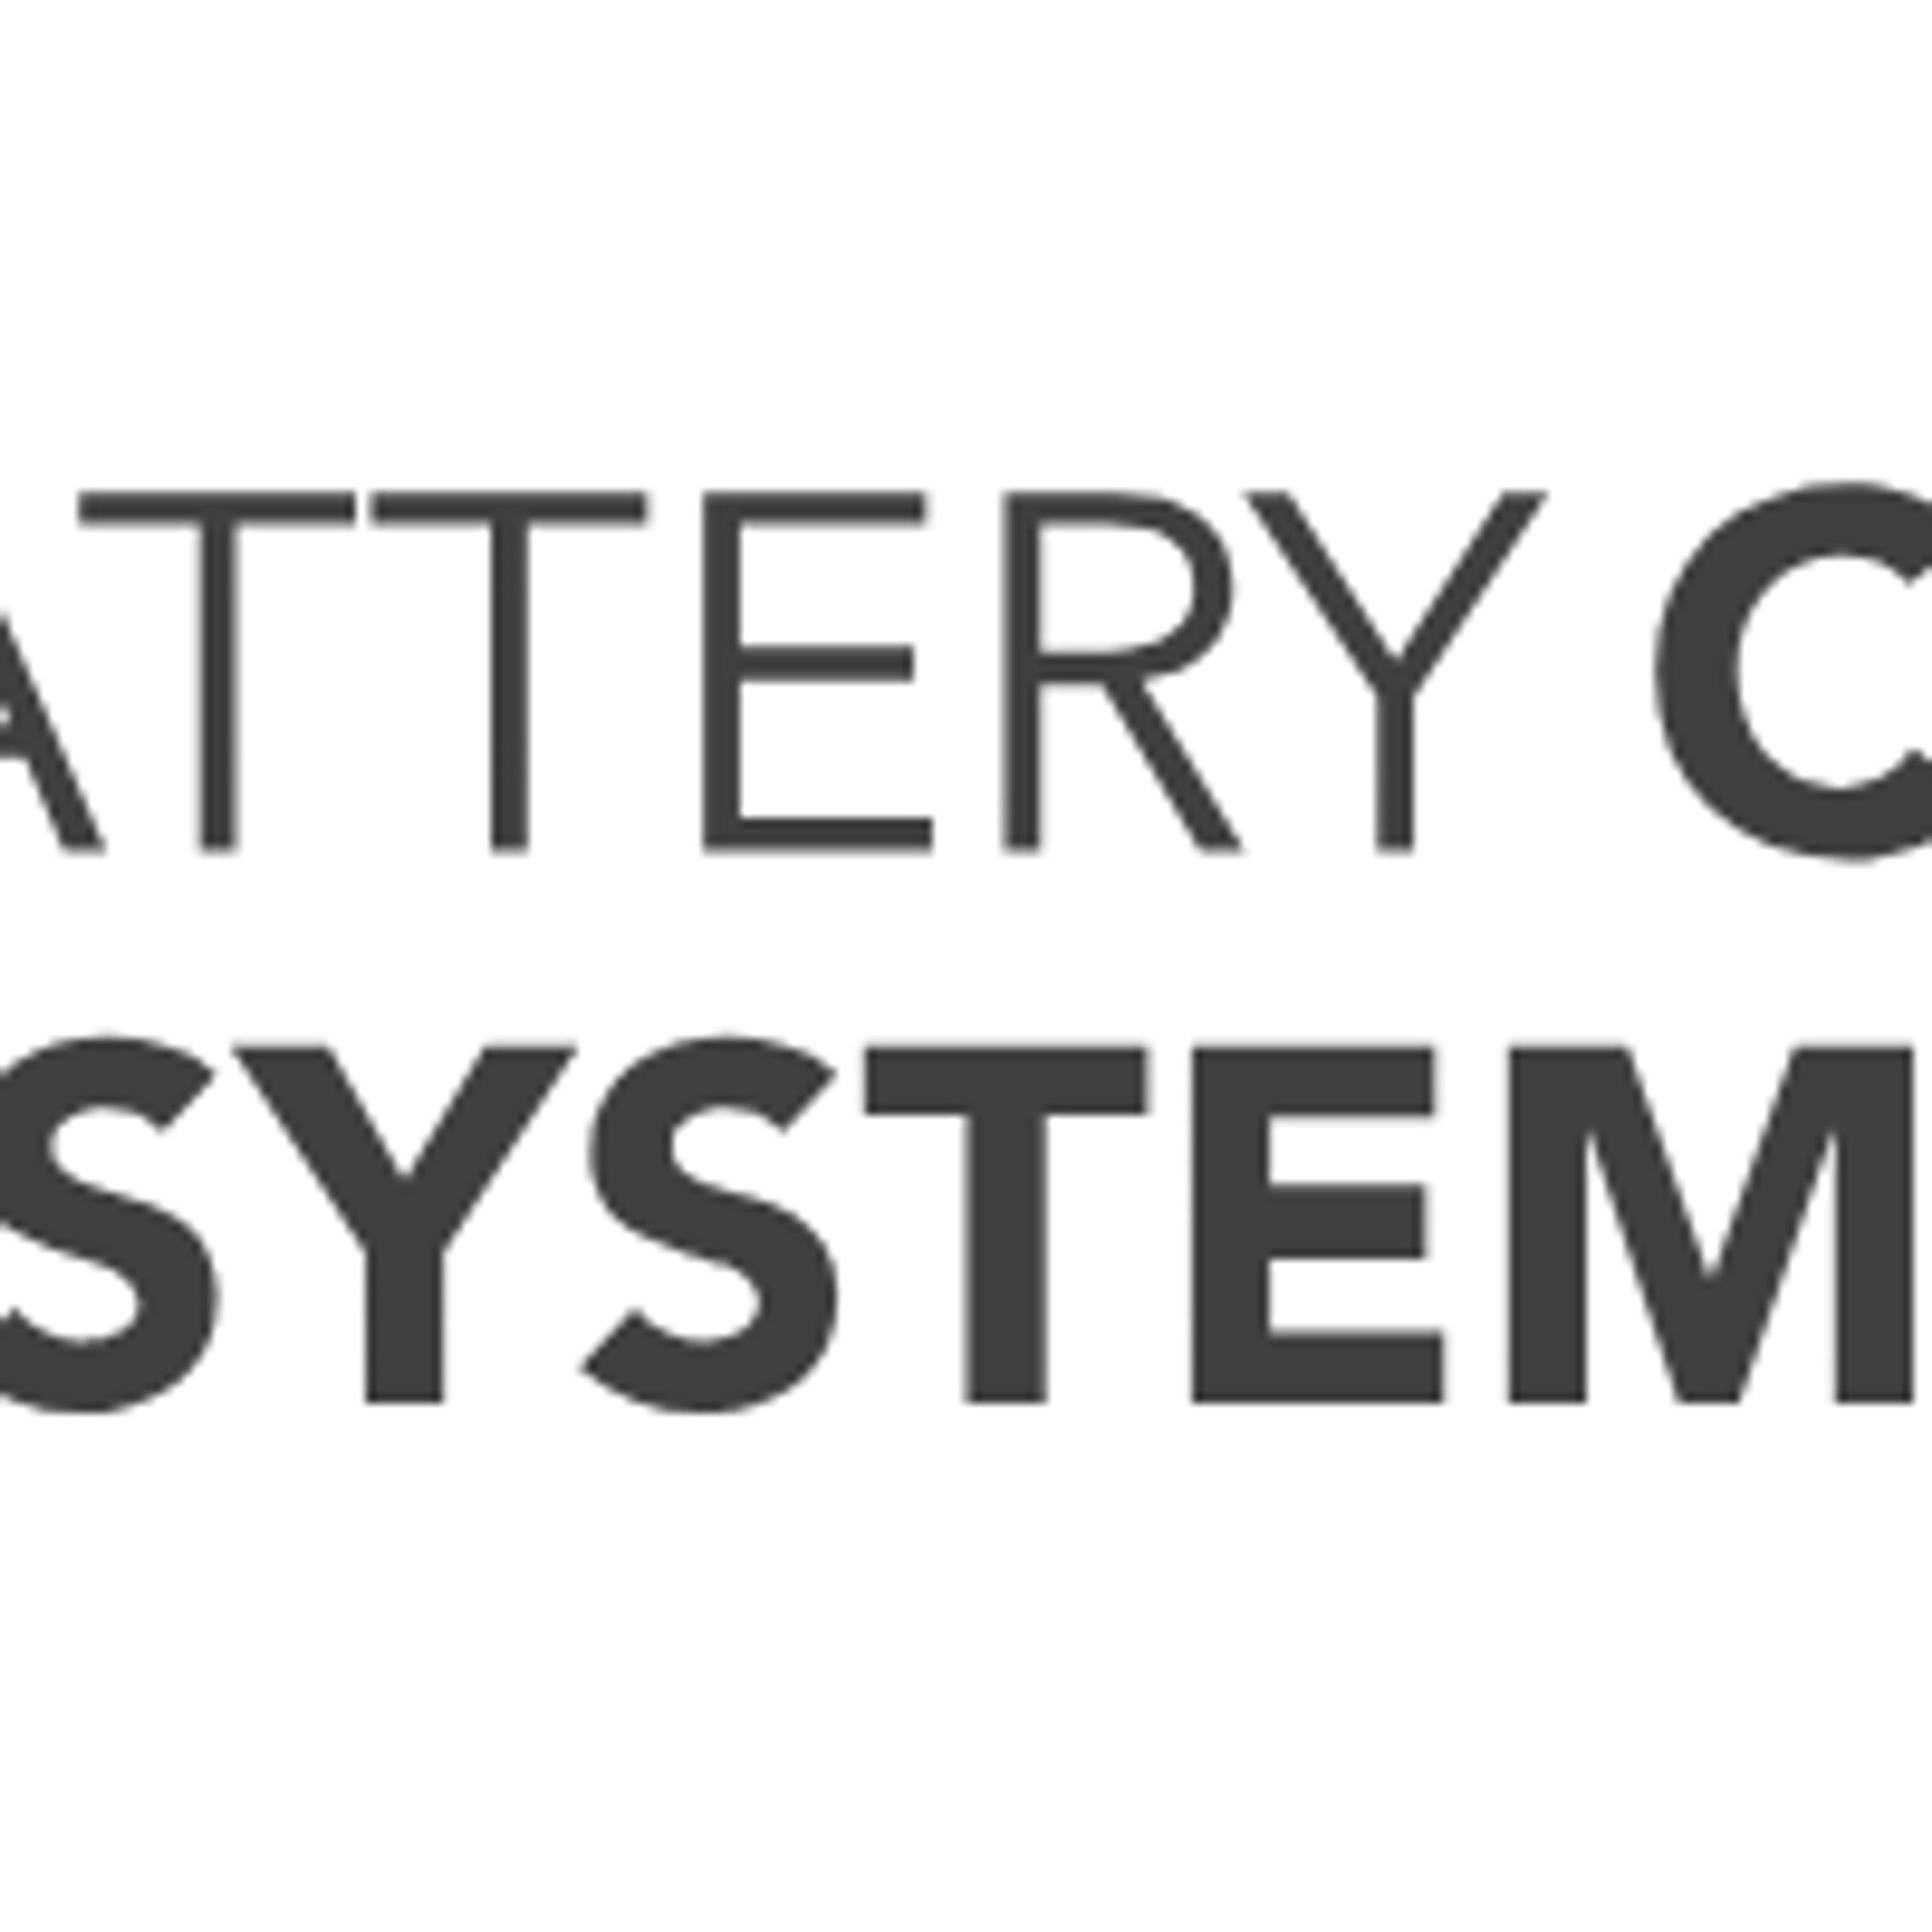 Battery Cells & System Expo